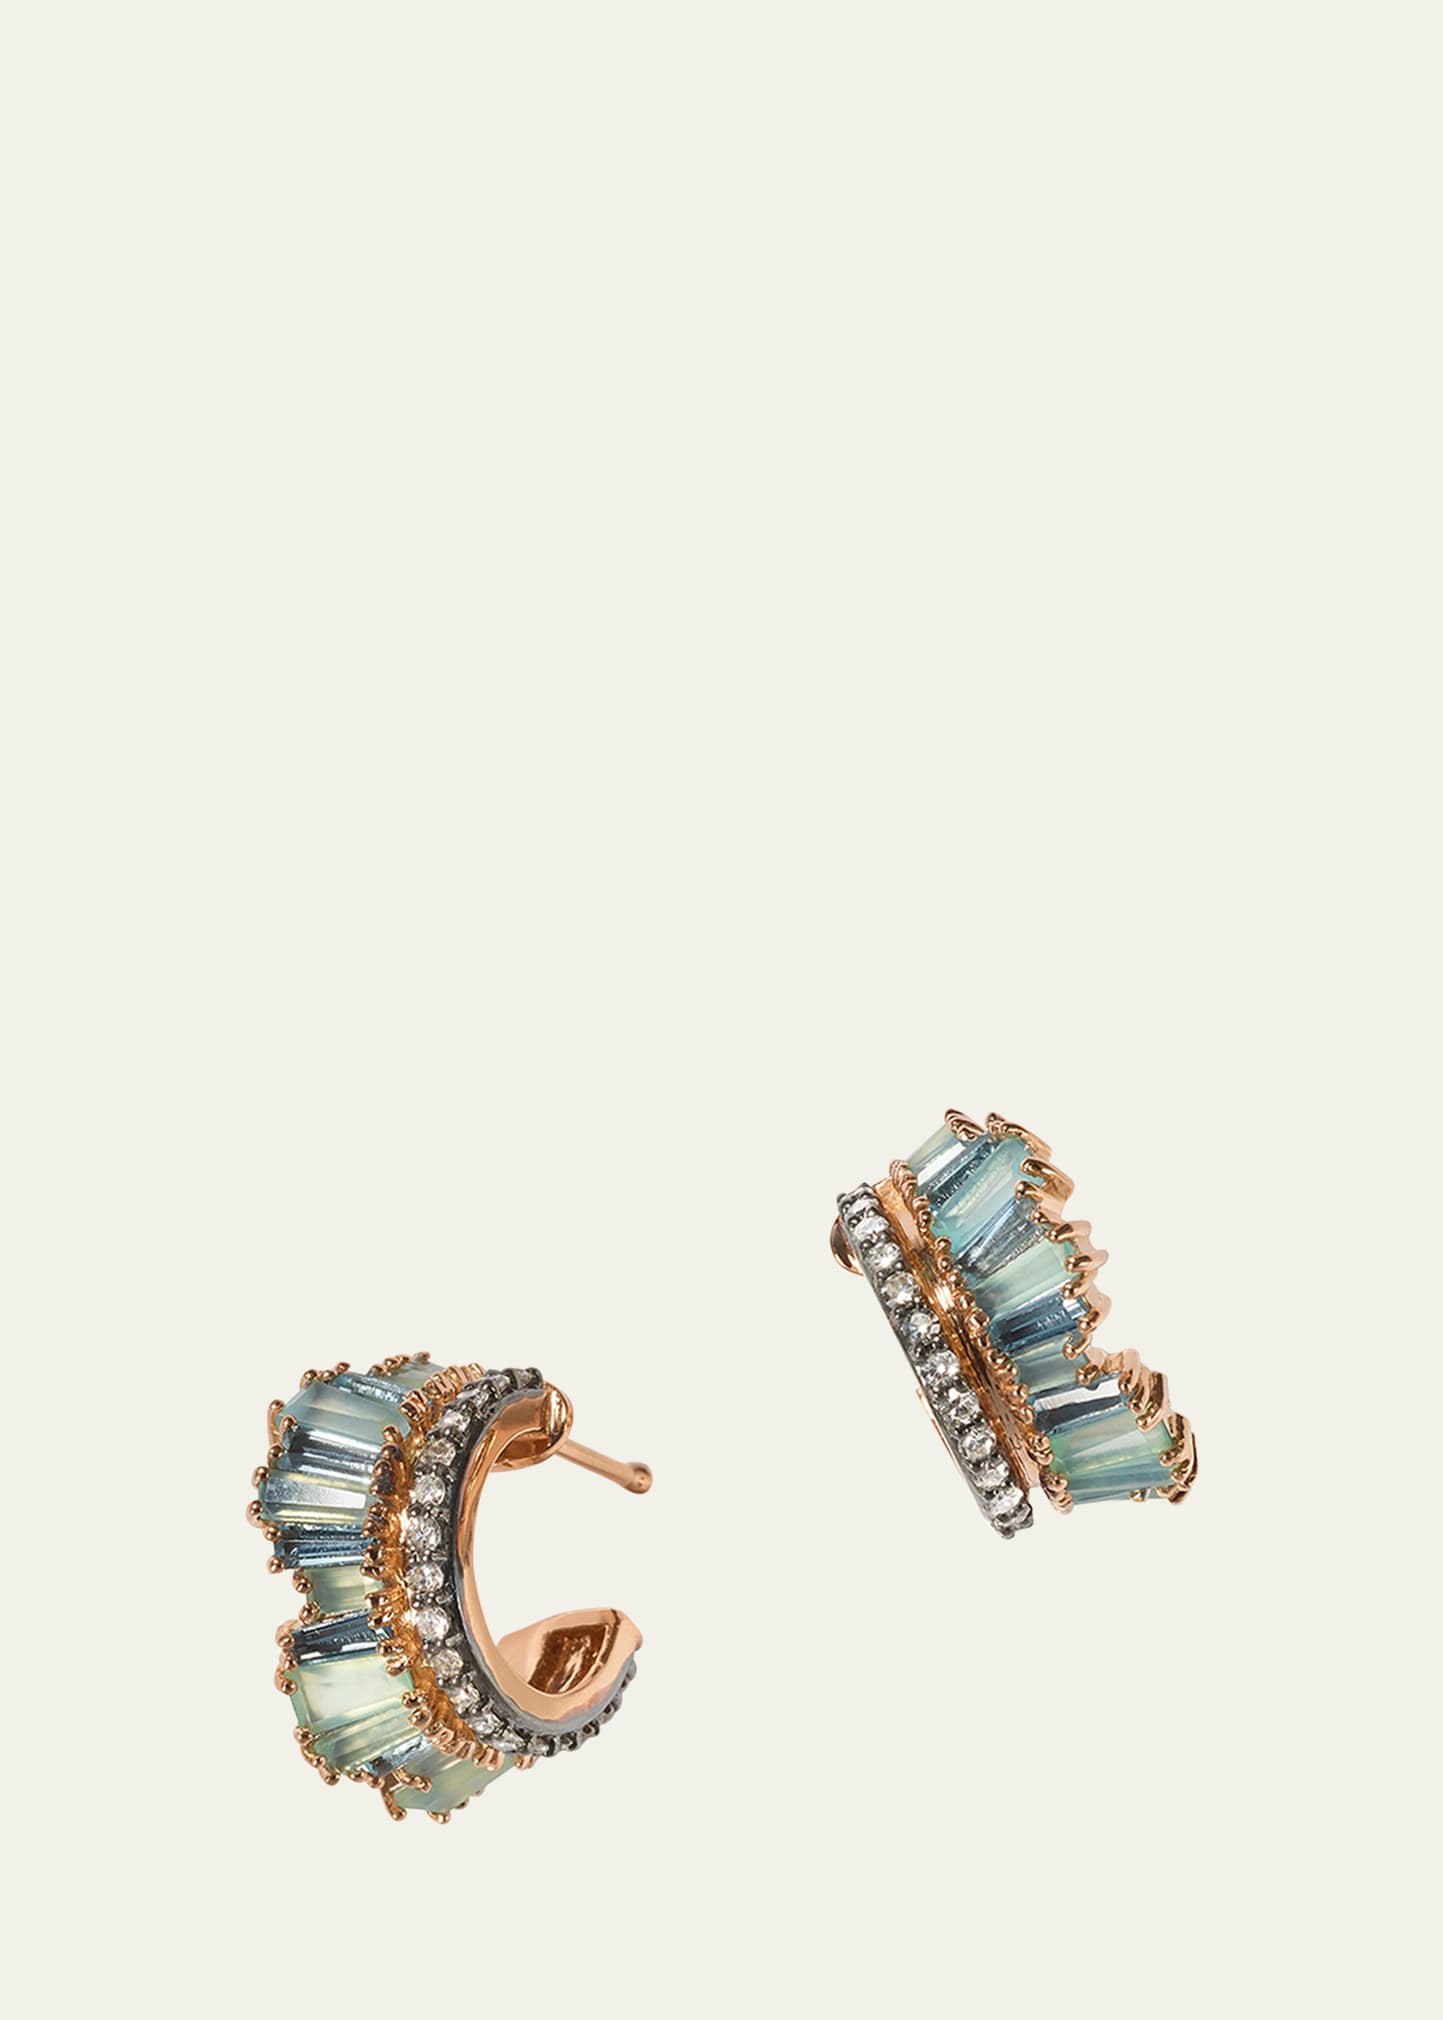 20K Recycled Rose Gold Petite Ruched Hoop Earrings with Blue Peruvian Opal, Aquamarine and White Diamonds